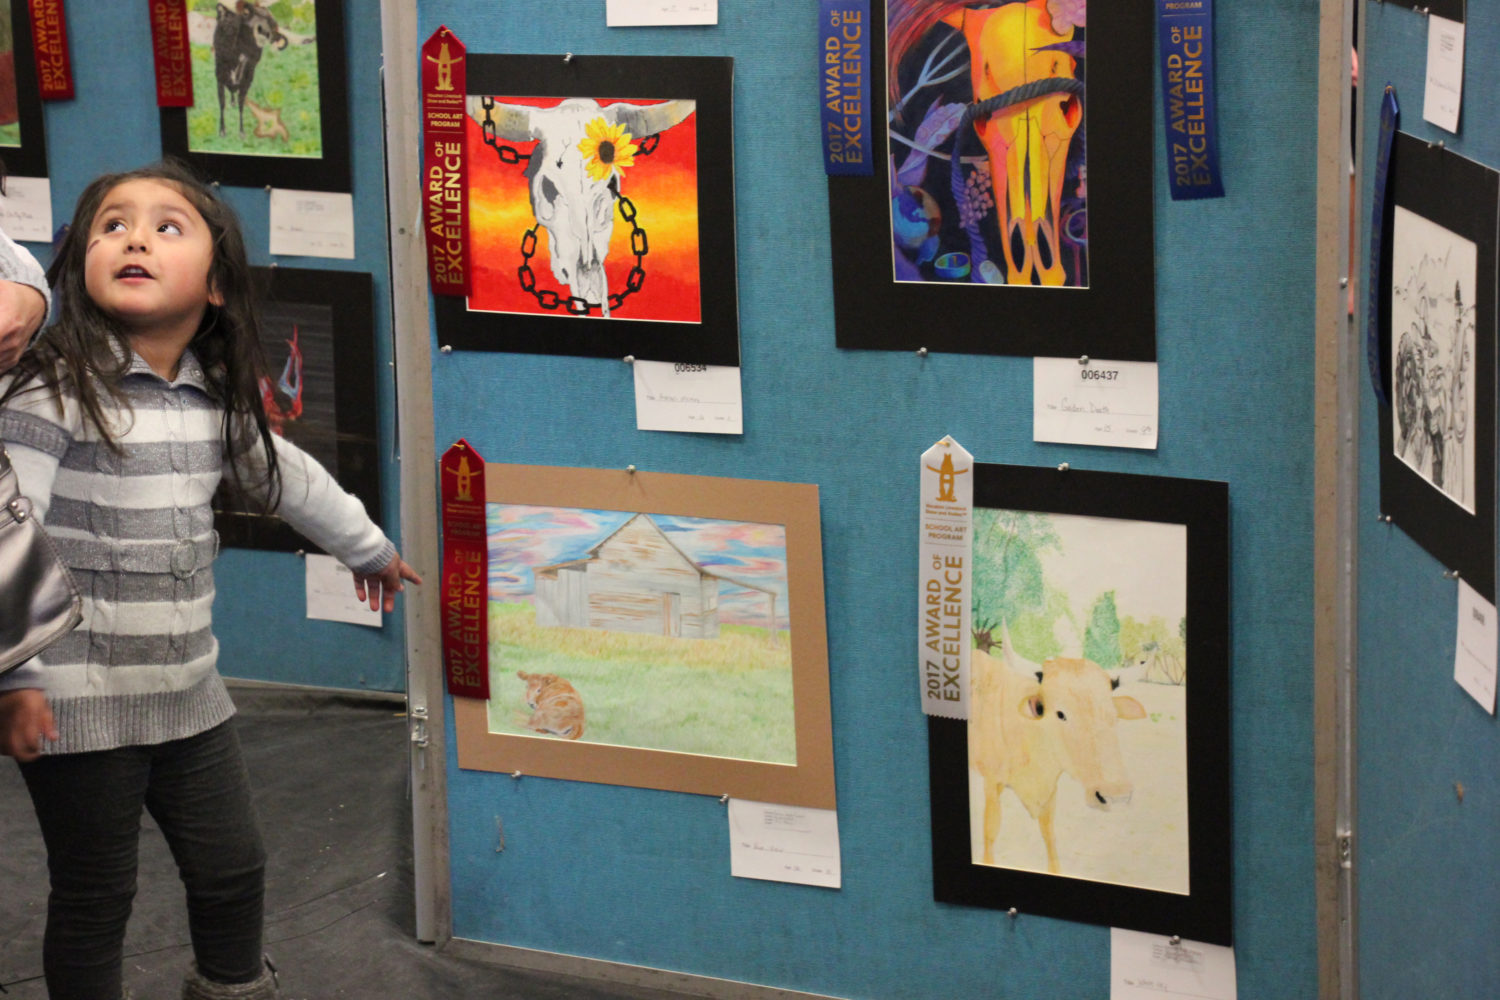 An attendee at the Western Art show points out a favorite piece.